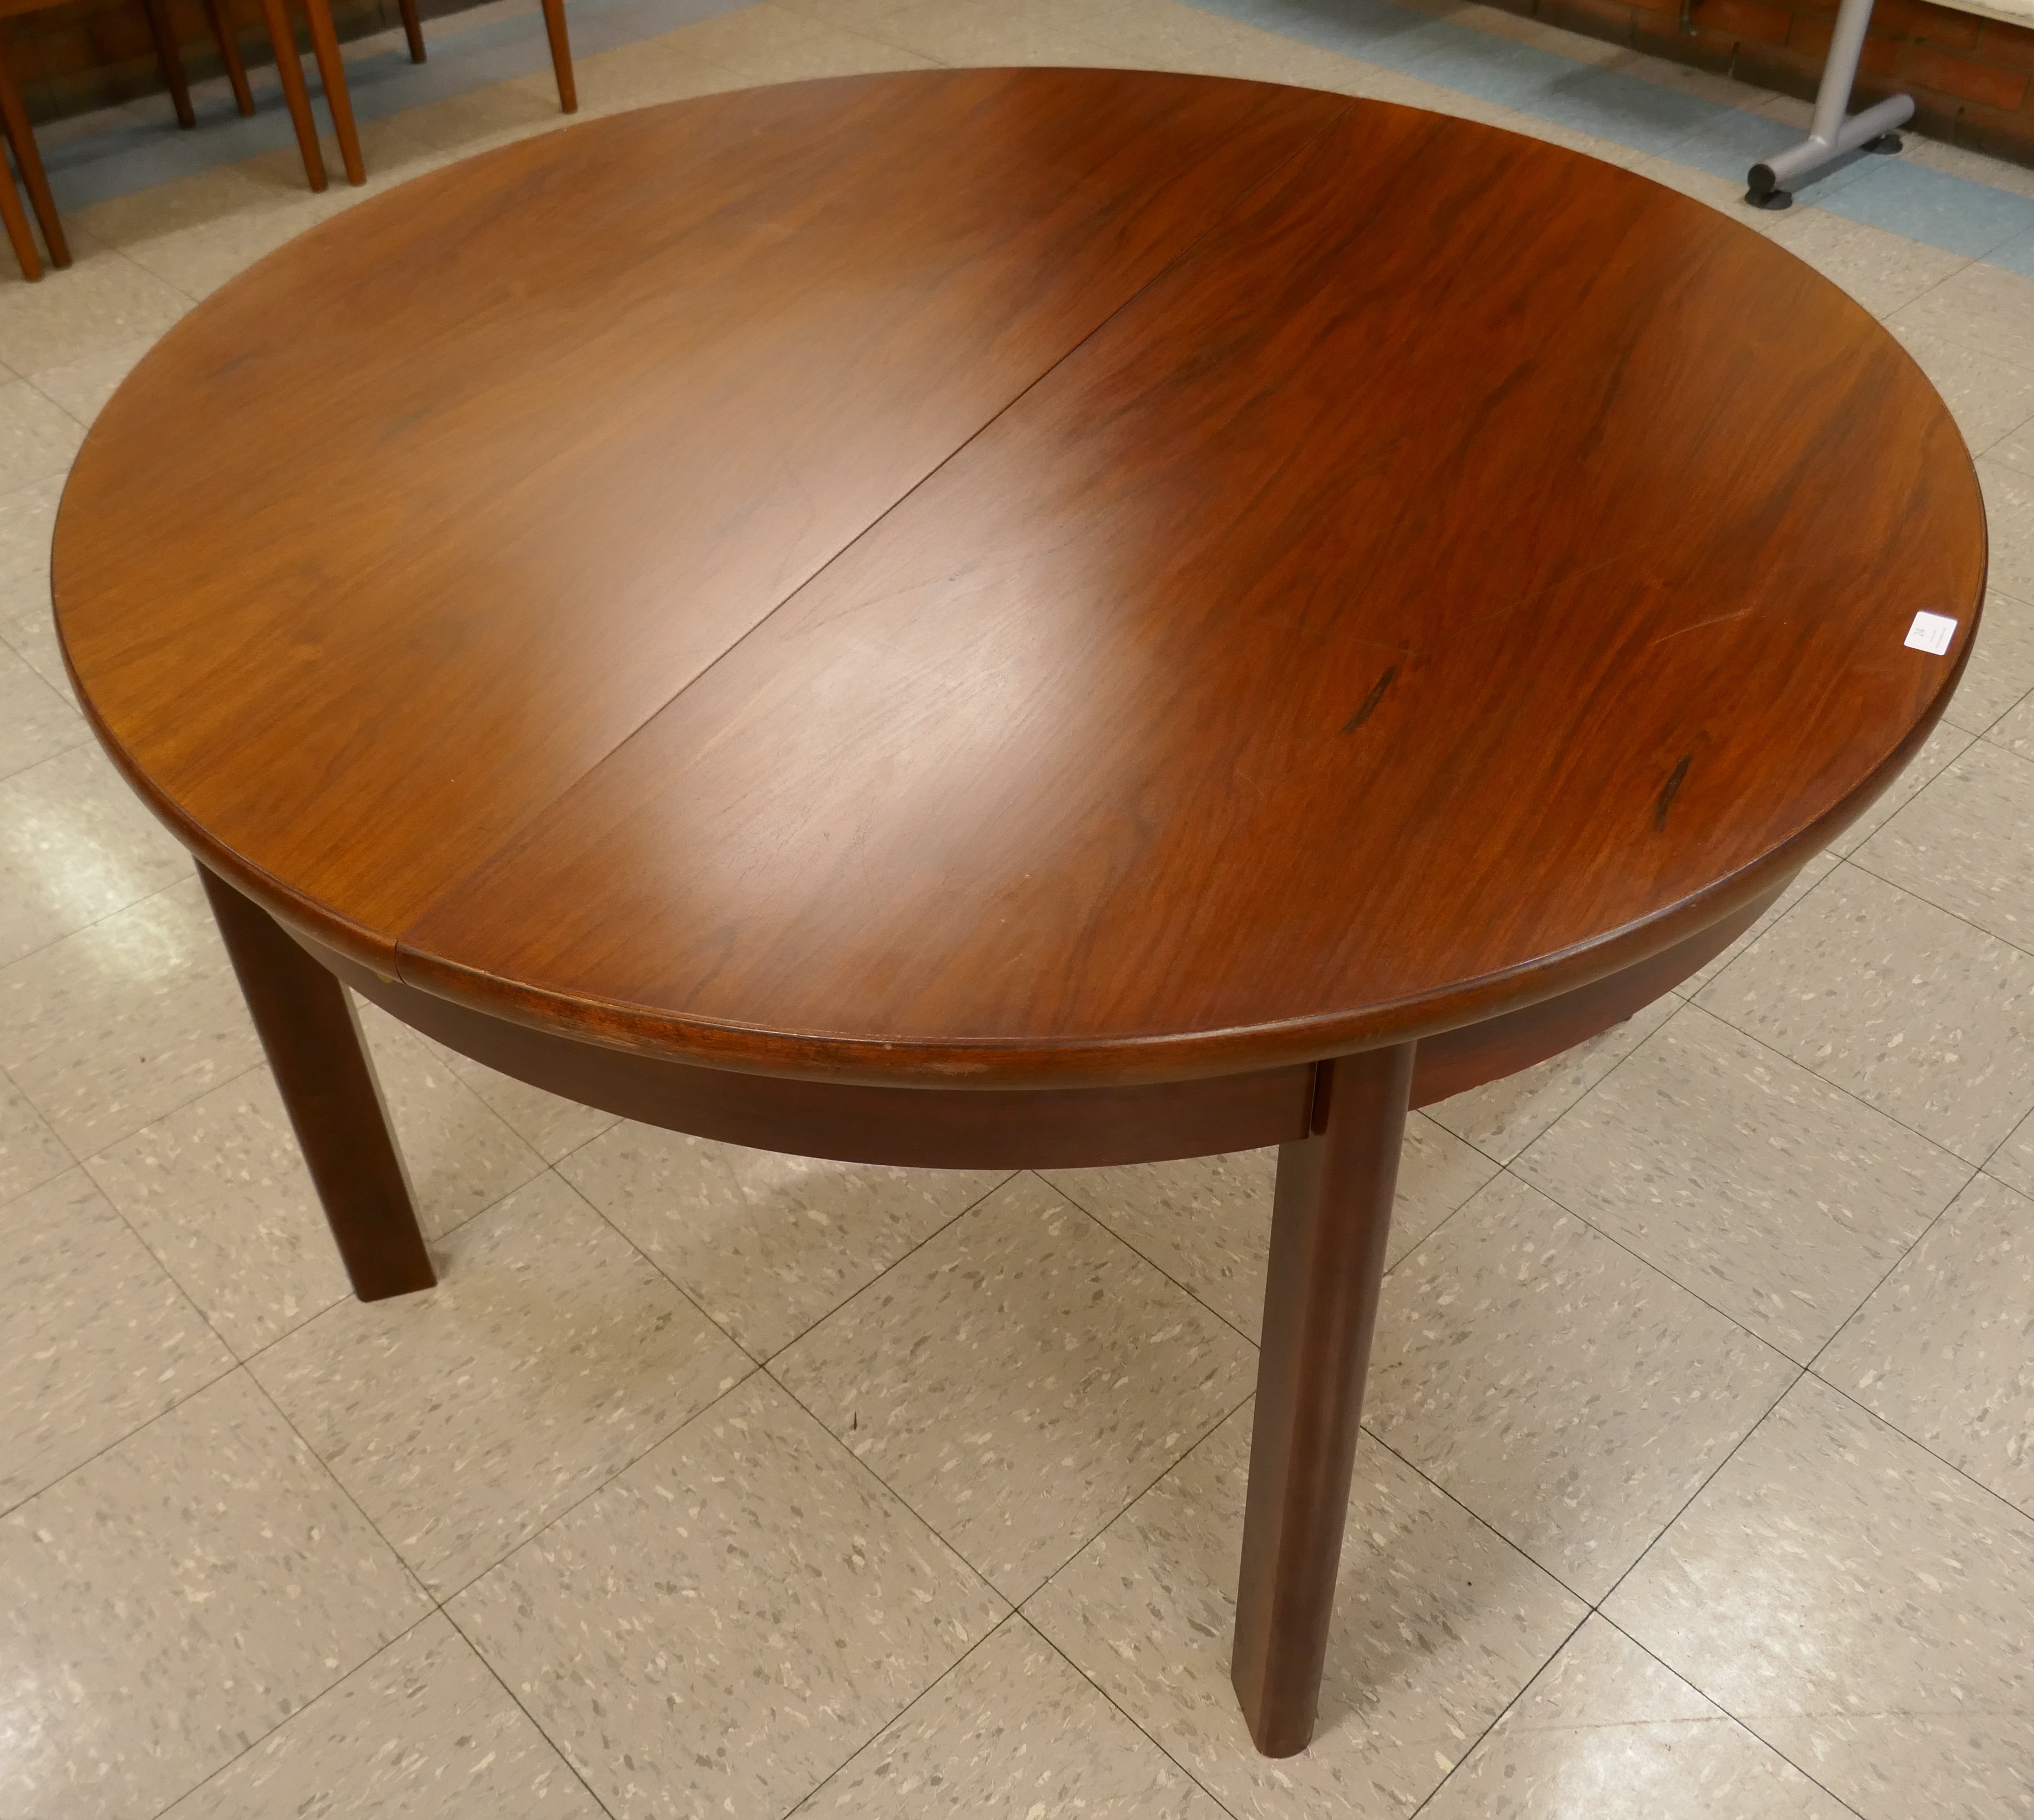 A Danish rosewood circular extending dining table. CITES A10 no. 24GBA10V19RFP - Image 2 of 4